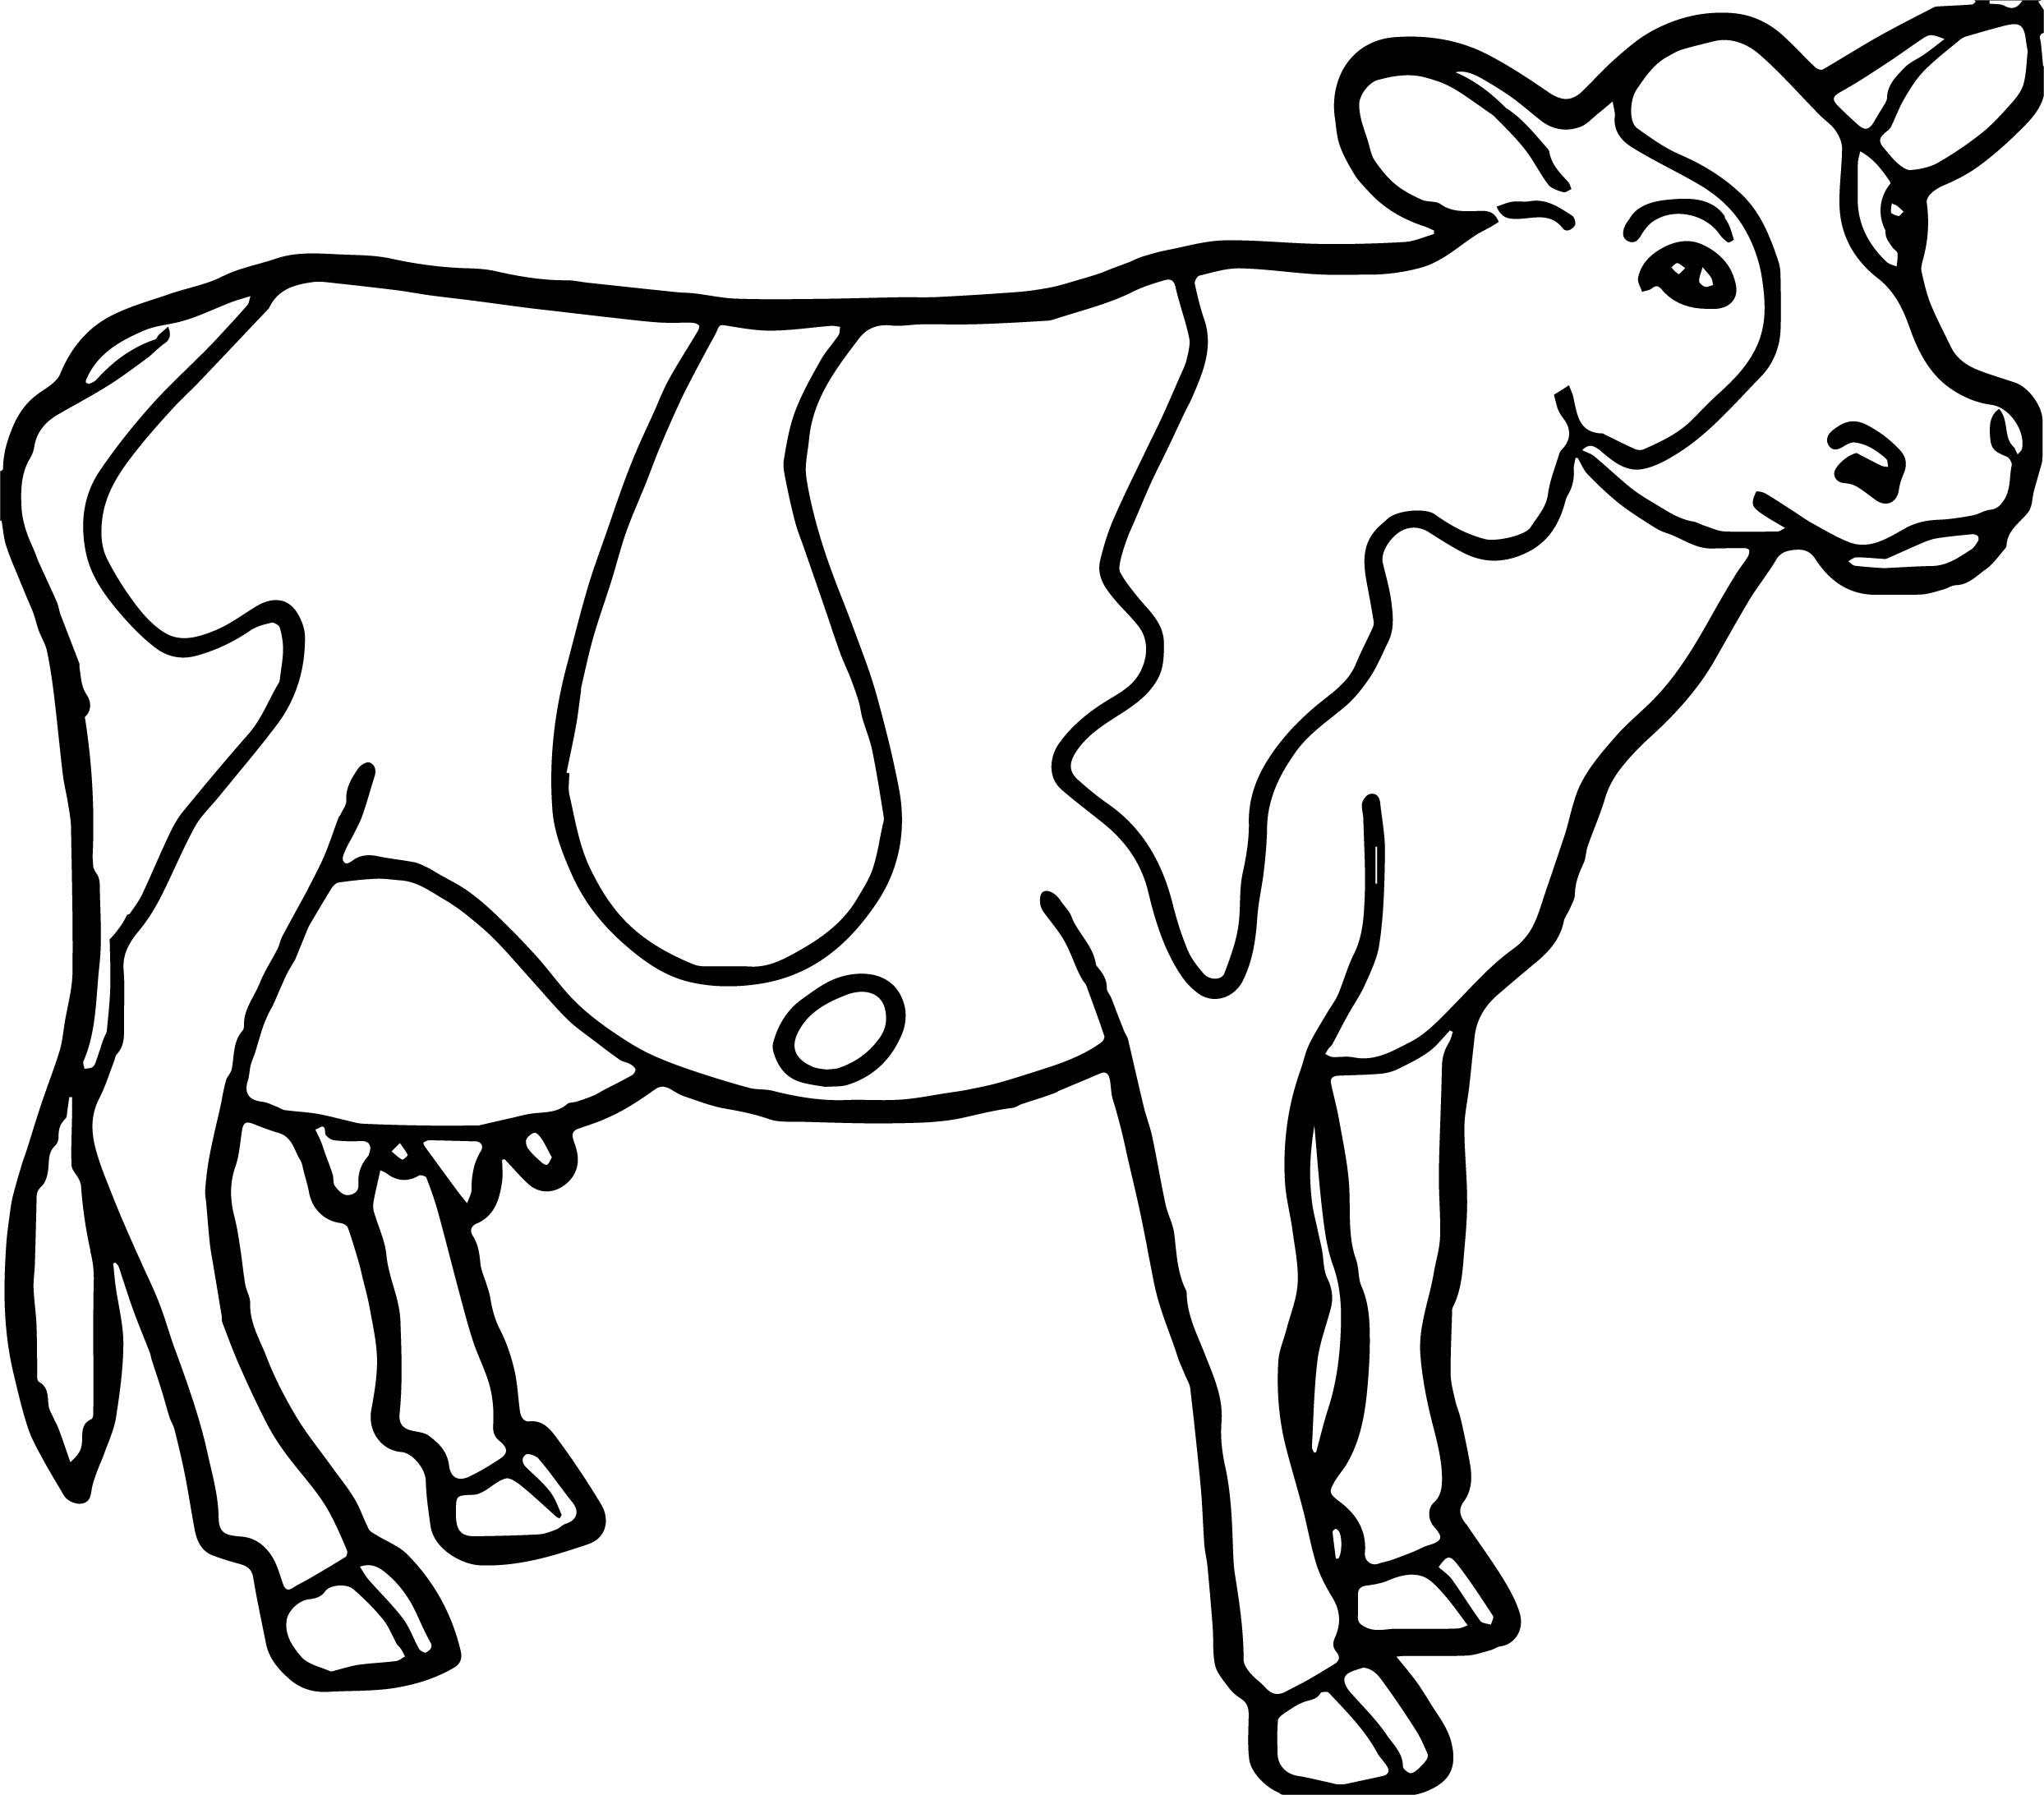 Cattle Coloring Pages at GetColorings.com | Free printable colorings